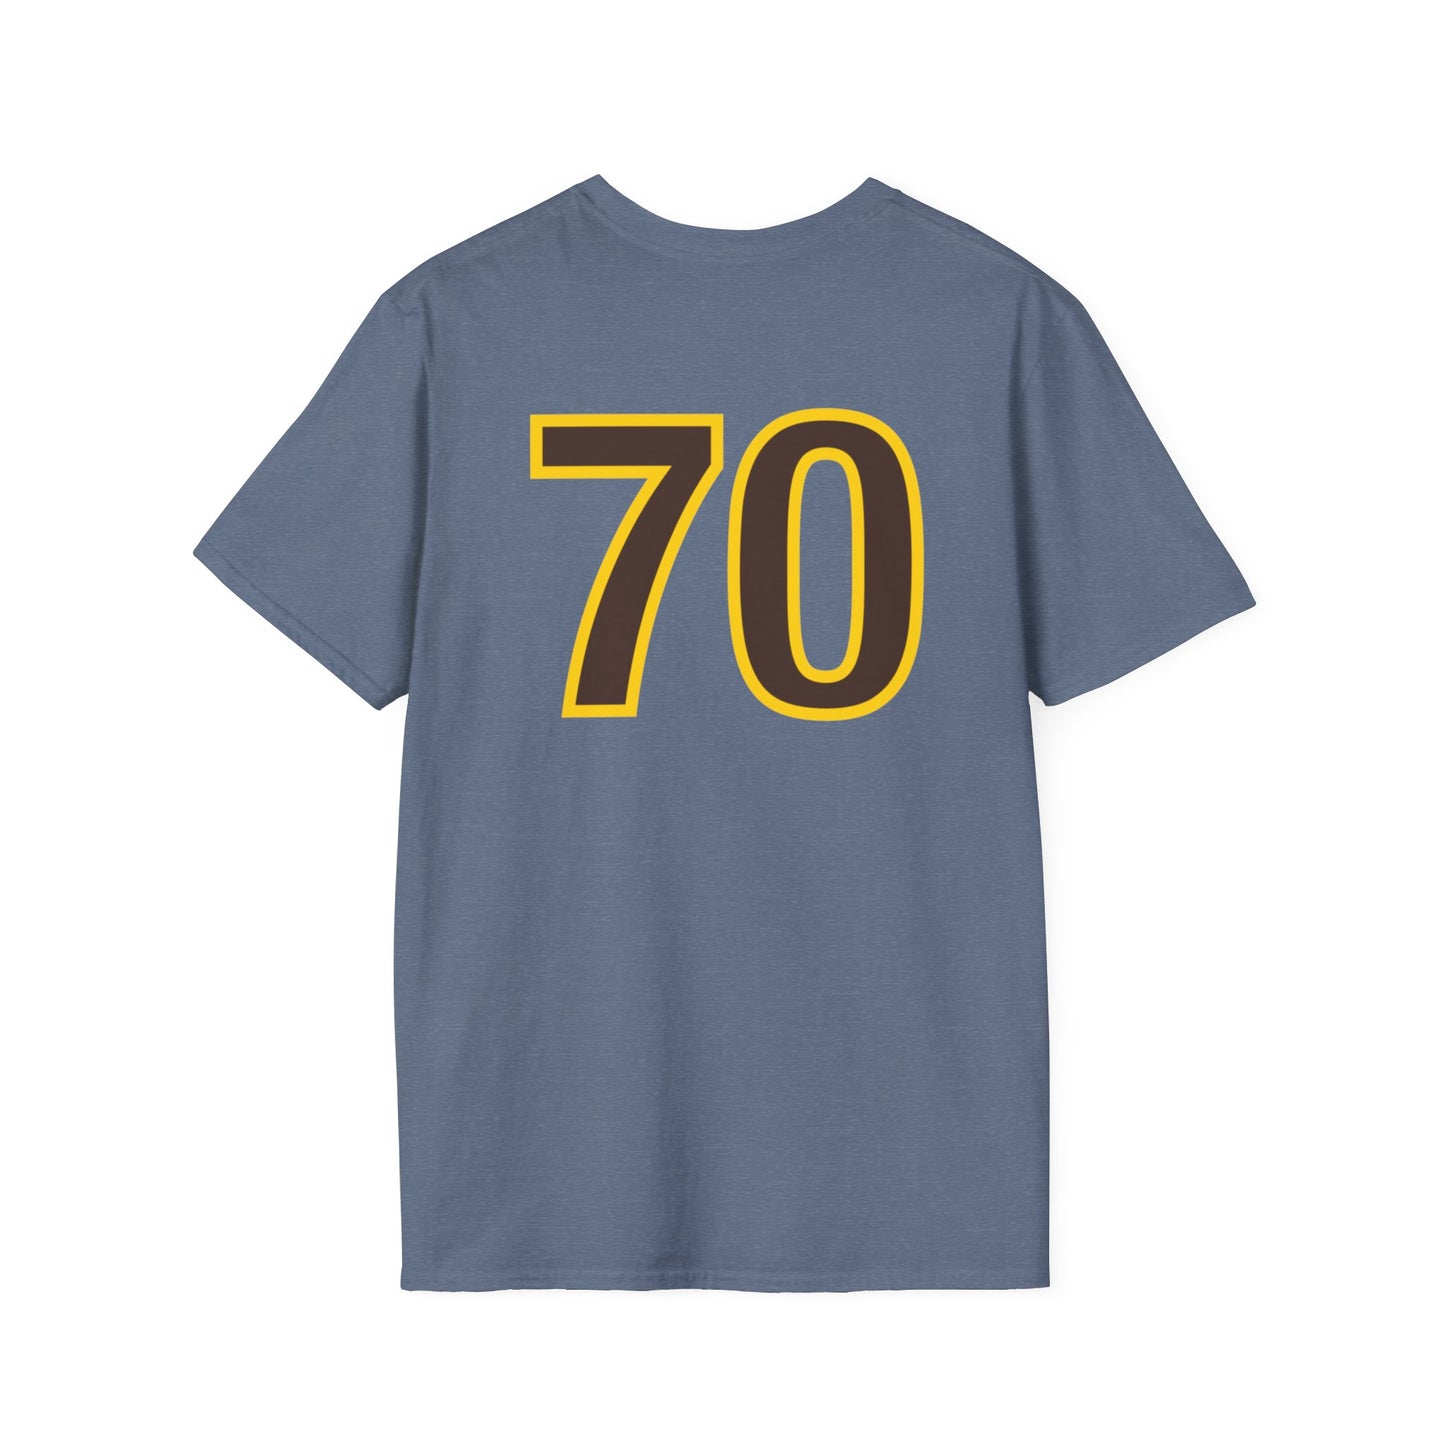 7 Zero is Our Hero With The Number 70 on The Back, Rex Merch